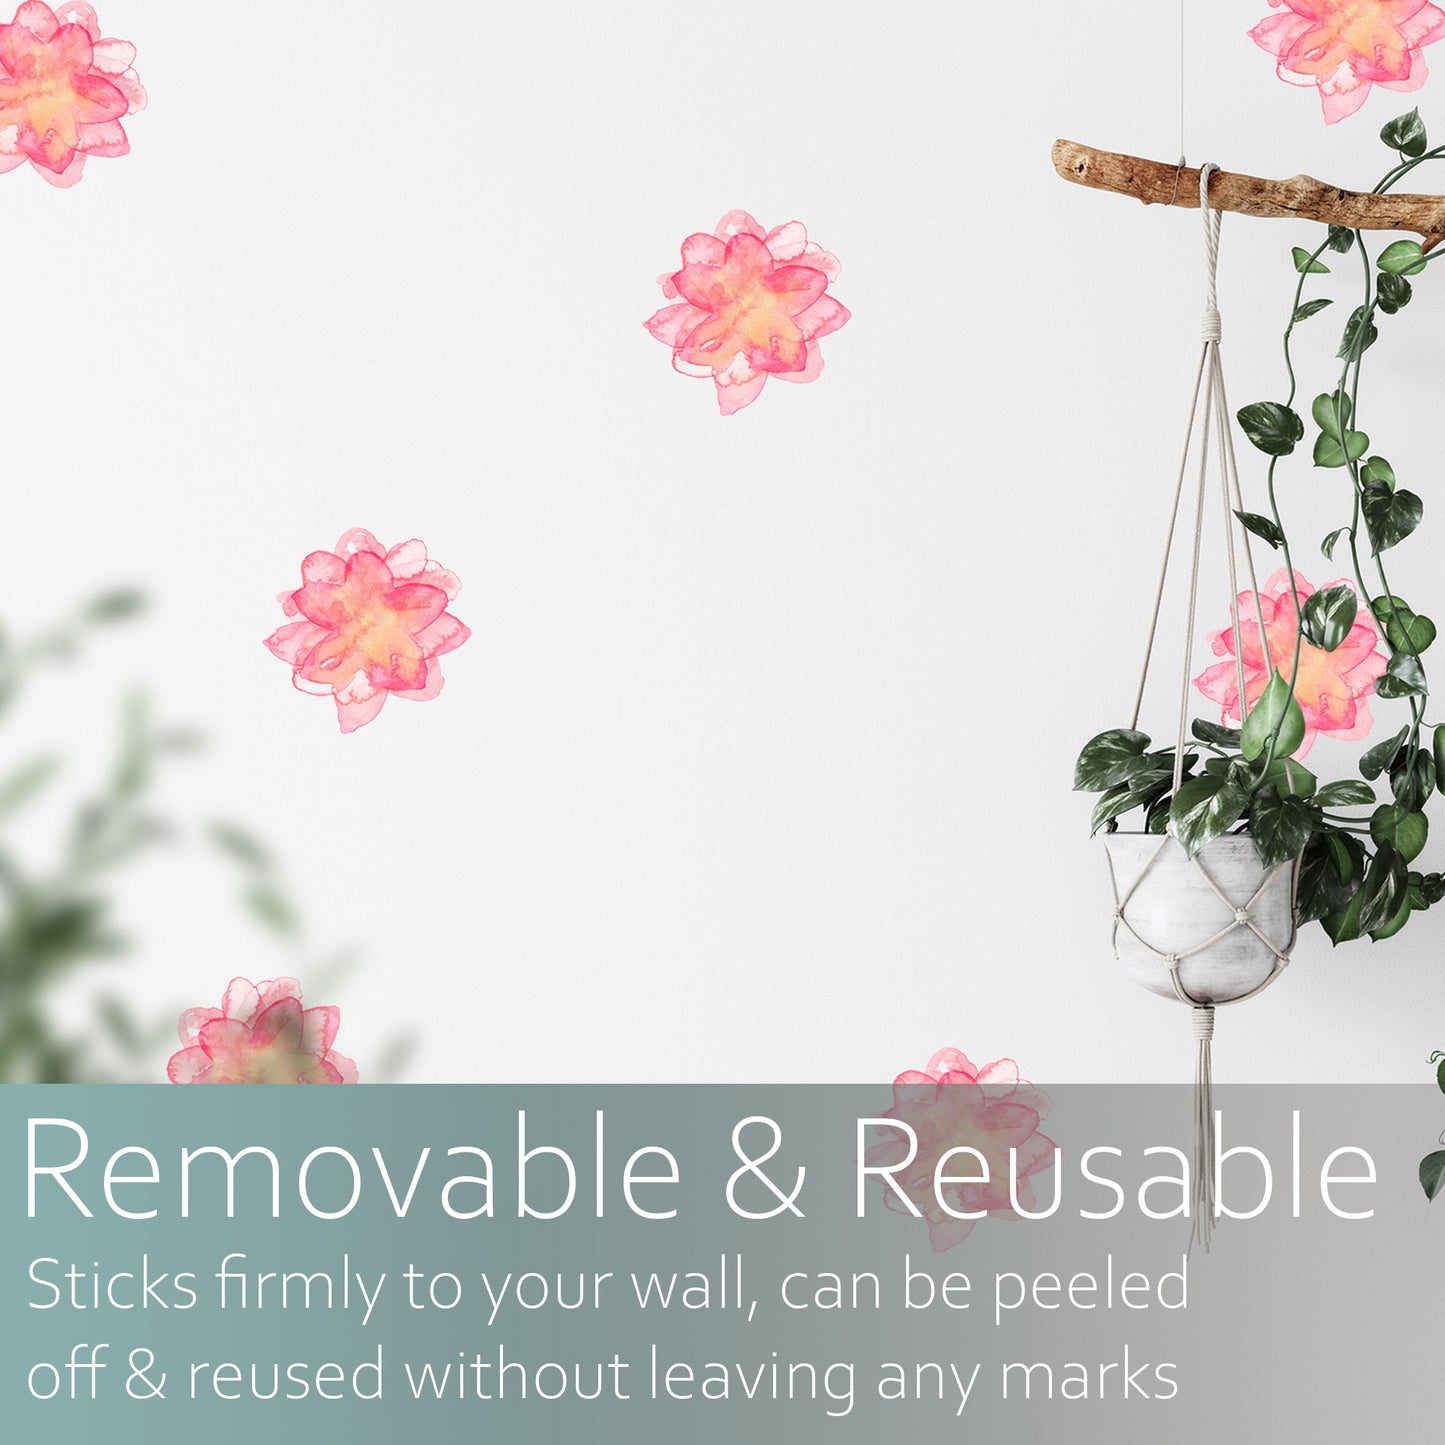 Whimsical watercolour pink flowers | Fabric wall stickers